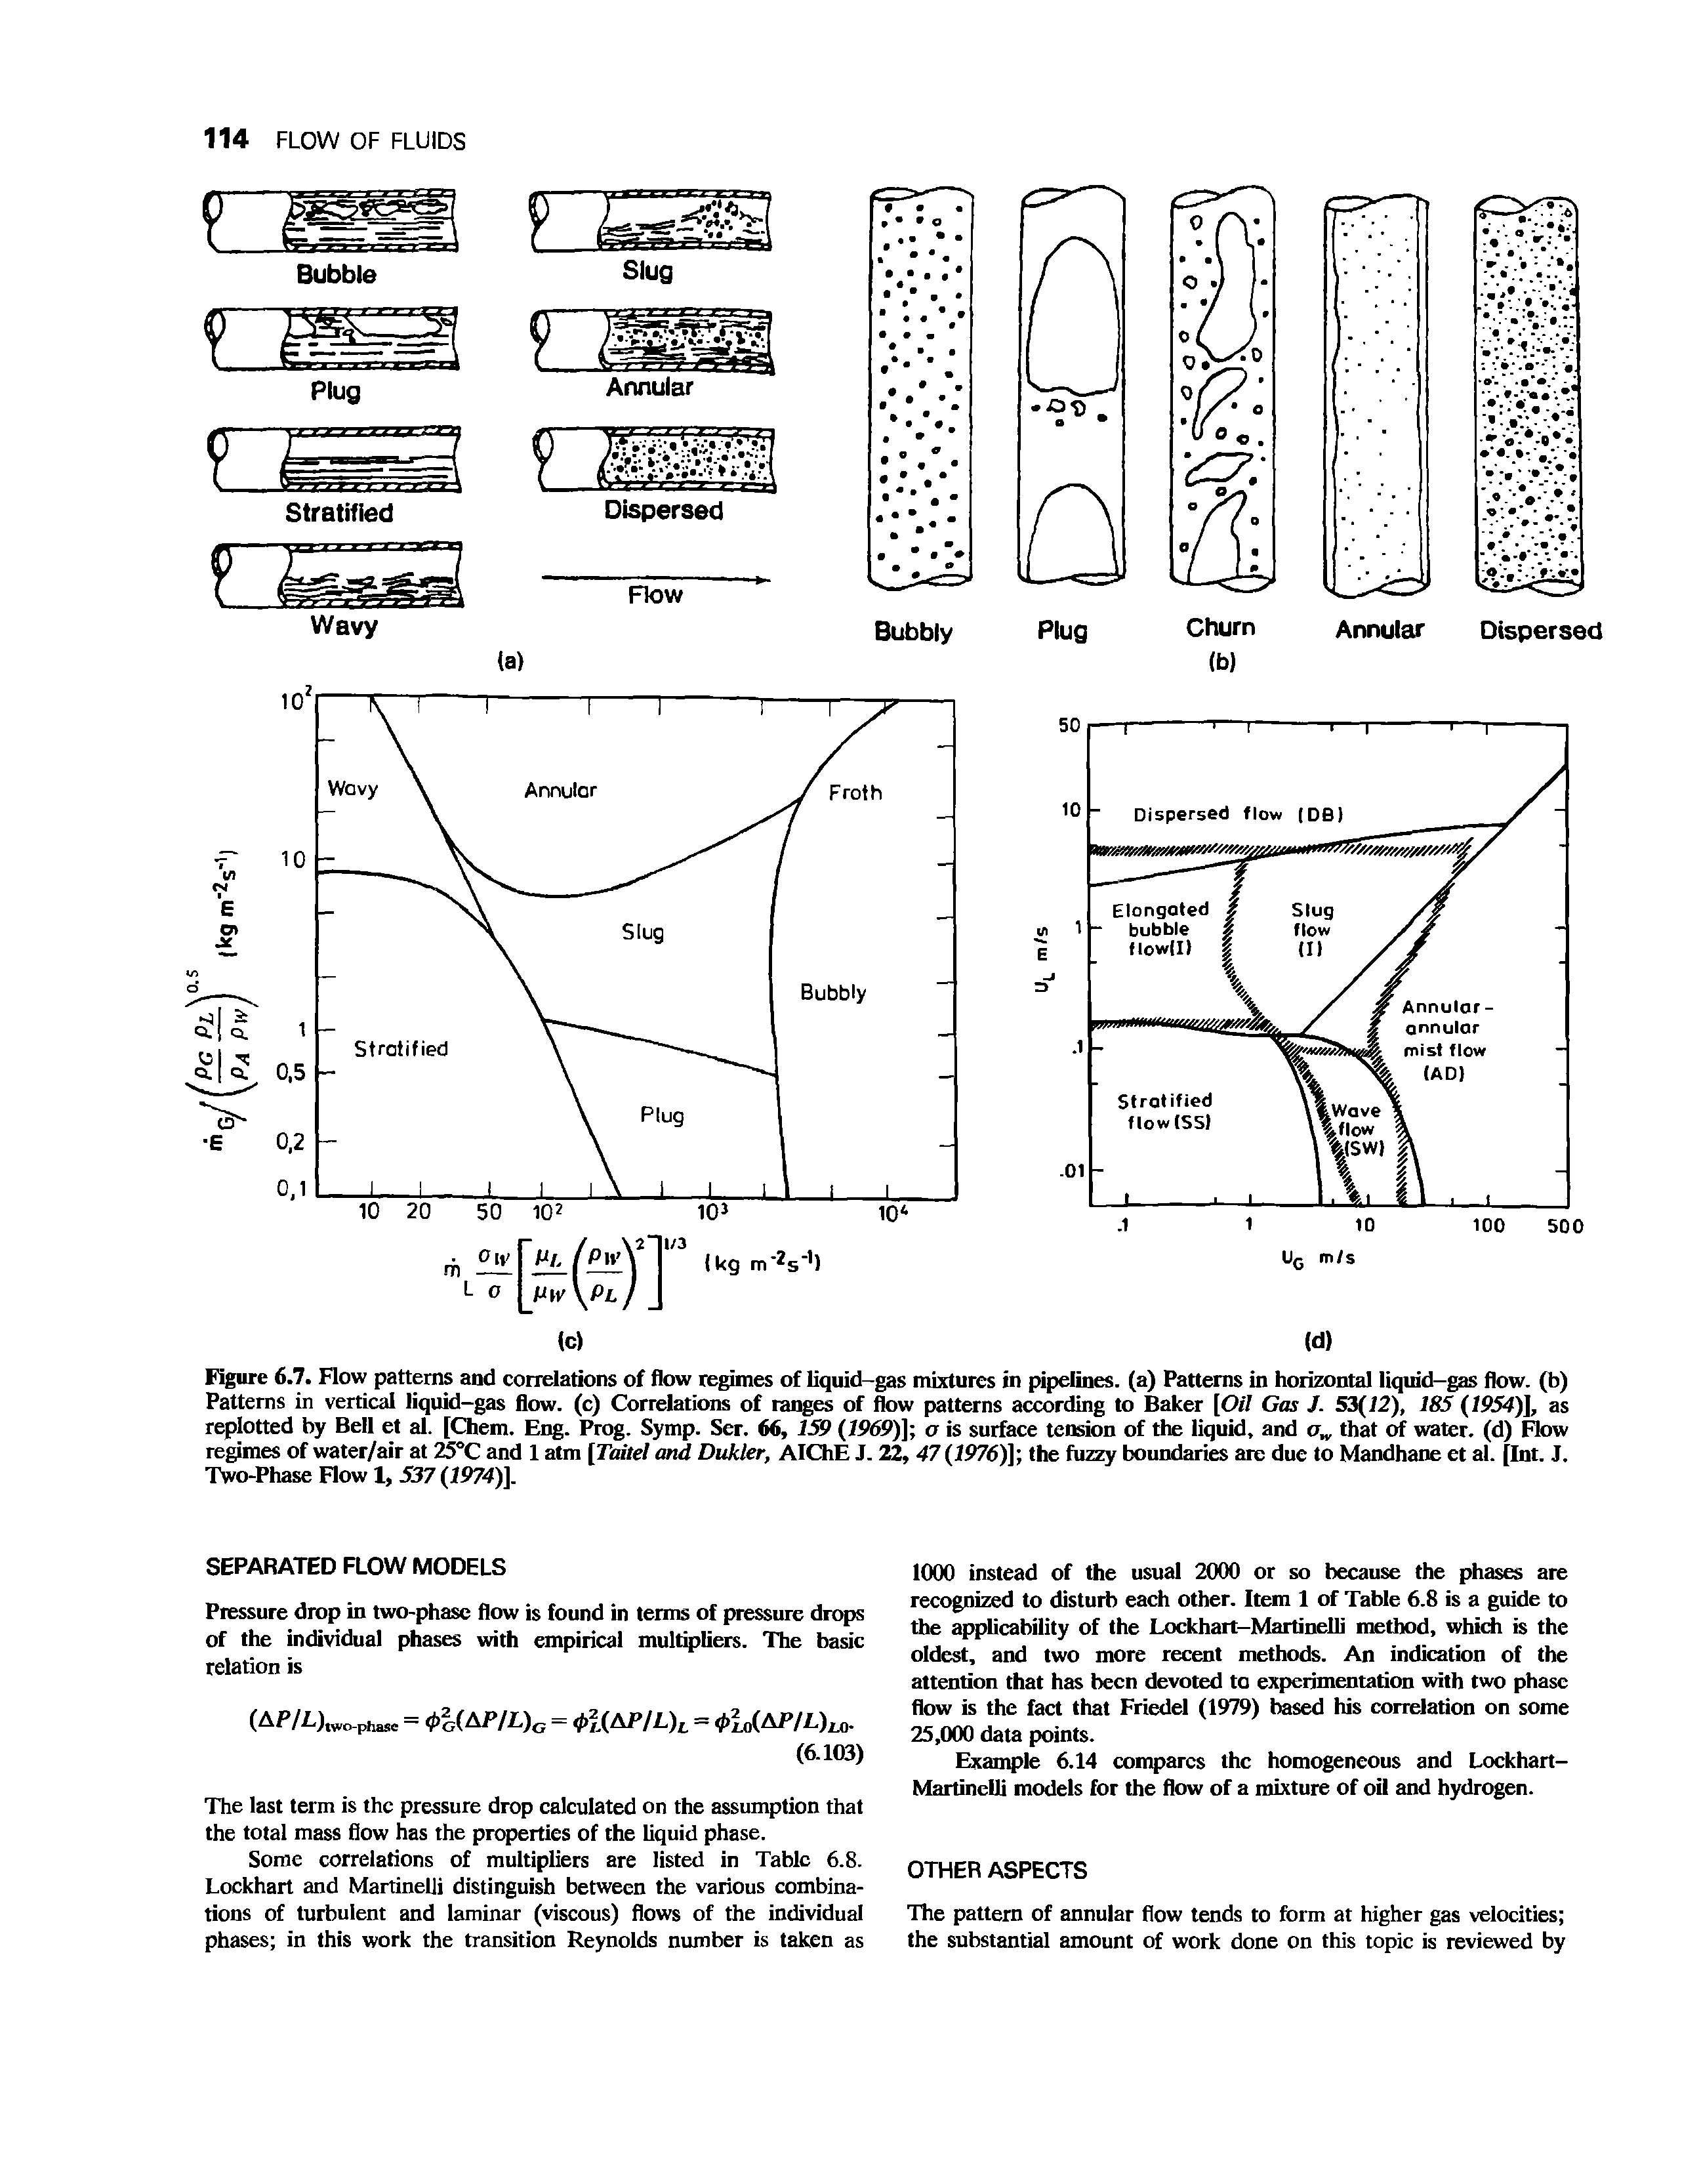 Figure 6.7. Flow patterns and correlations of flow regimes of liquid-gas mixtures in pipelines, (a) Patterns in horizontal liquid-gas flow, (b) Patterns in vertical liquid-gas flow, (c) Correlations of ranges of flow patterns according to Baker [Oil Gas J. 53(72), 185 (1954)], as replotted by Bell et al. [Chem. Eng. Prog. Symp. Ser. 66, 159 (1969)] a is surface tension of the liquid, and a that of water, (d) Flow regimes of water/air at 25°C and 1 atm [Taitel and Dukler, AIChE J. 22, 47(1976)] the fuzzy boundaries are due to Mandhane et al. [Int. J. Two-Phase Flow 1, 537 (1974)].